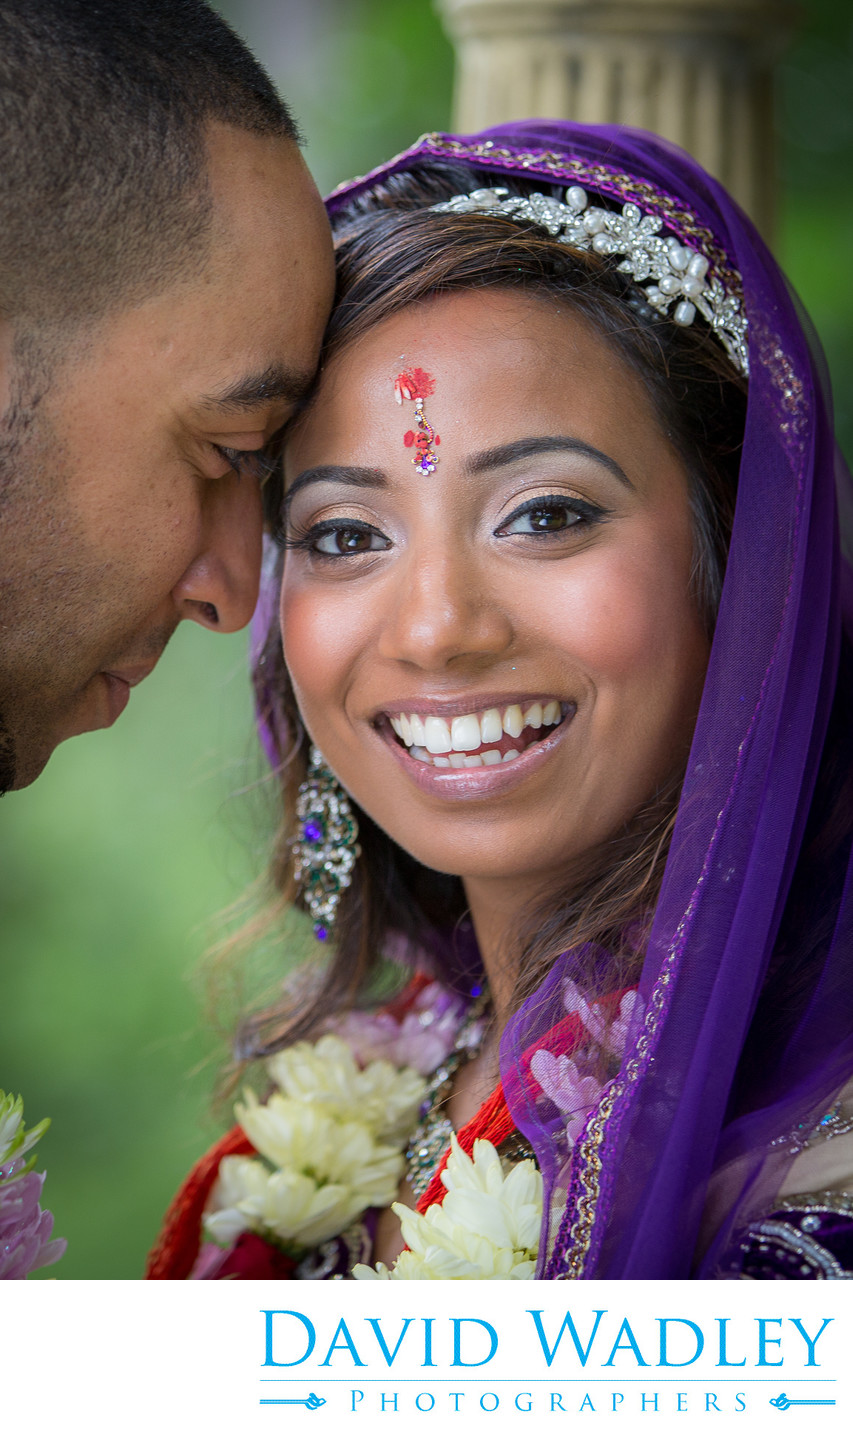 Asian wedding photography at Moxhull Hall Hotel in Sutton Coldfield.